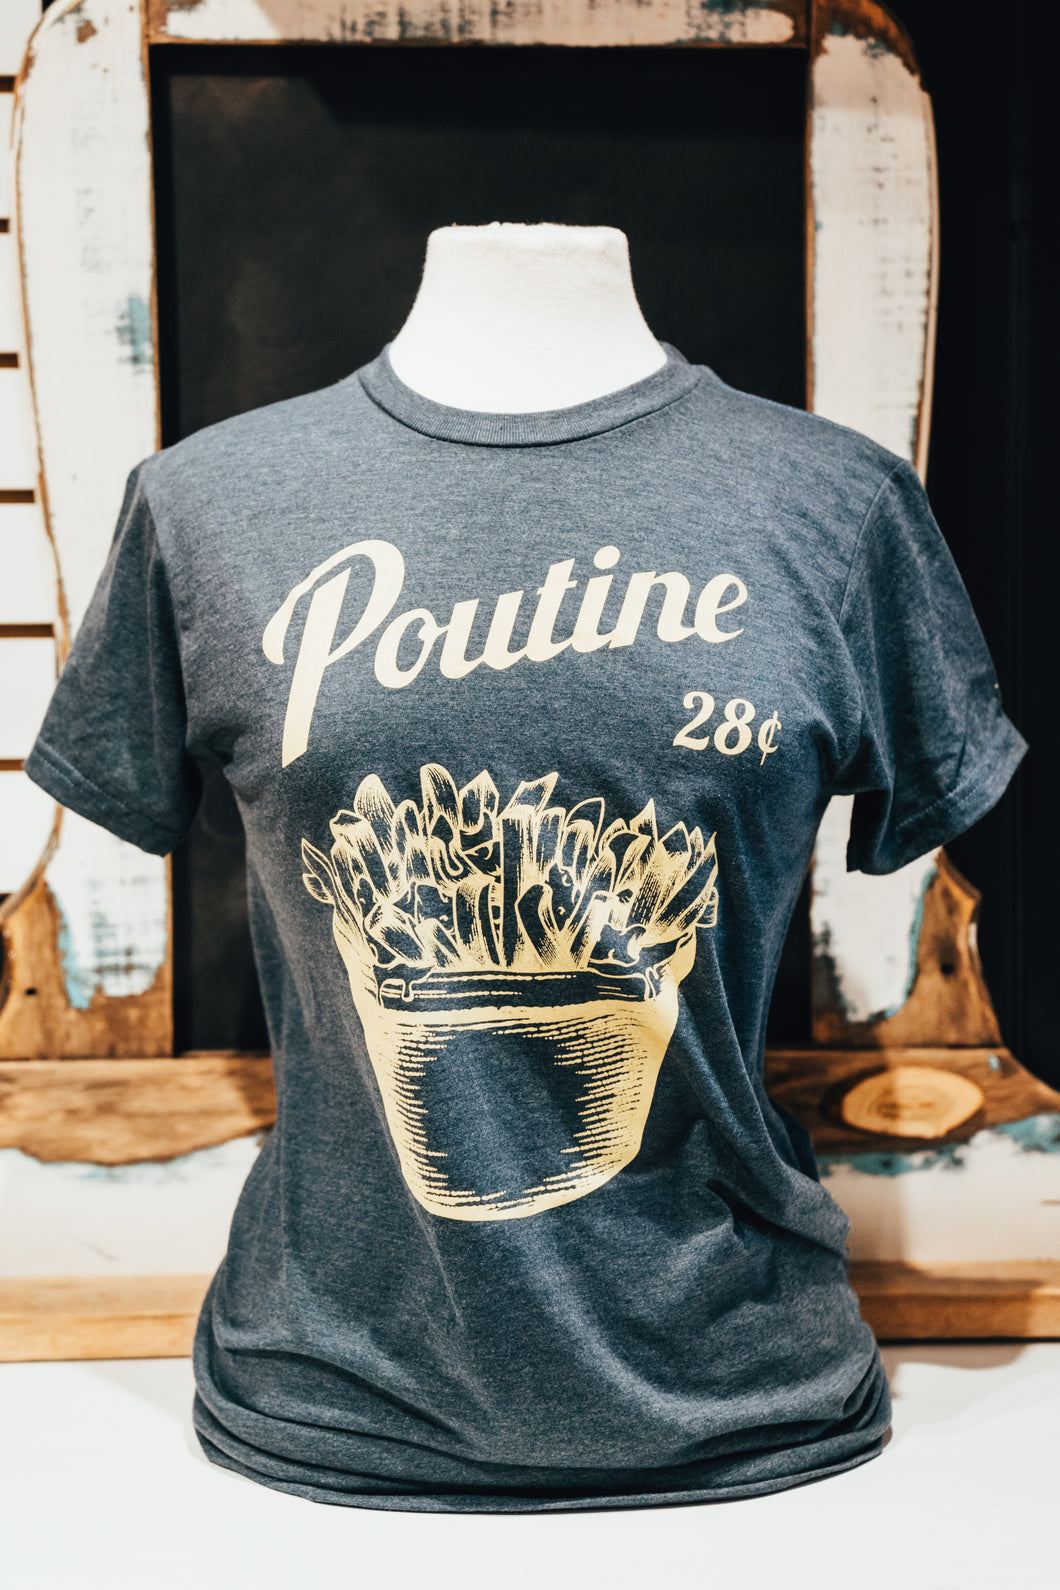 t shirt poutine quebec gravy french fries cheese curds tee shirt poutine canada national dish meal plat national canada quebec montréal hand printed 